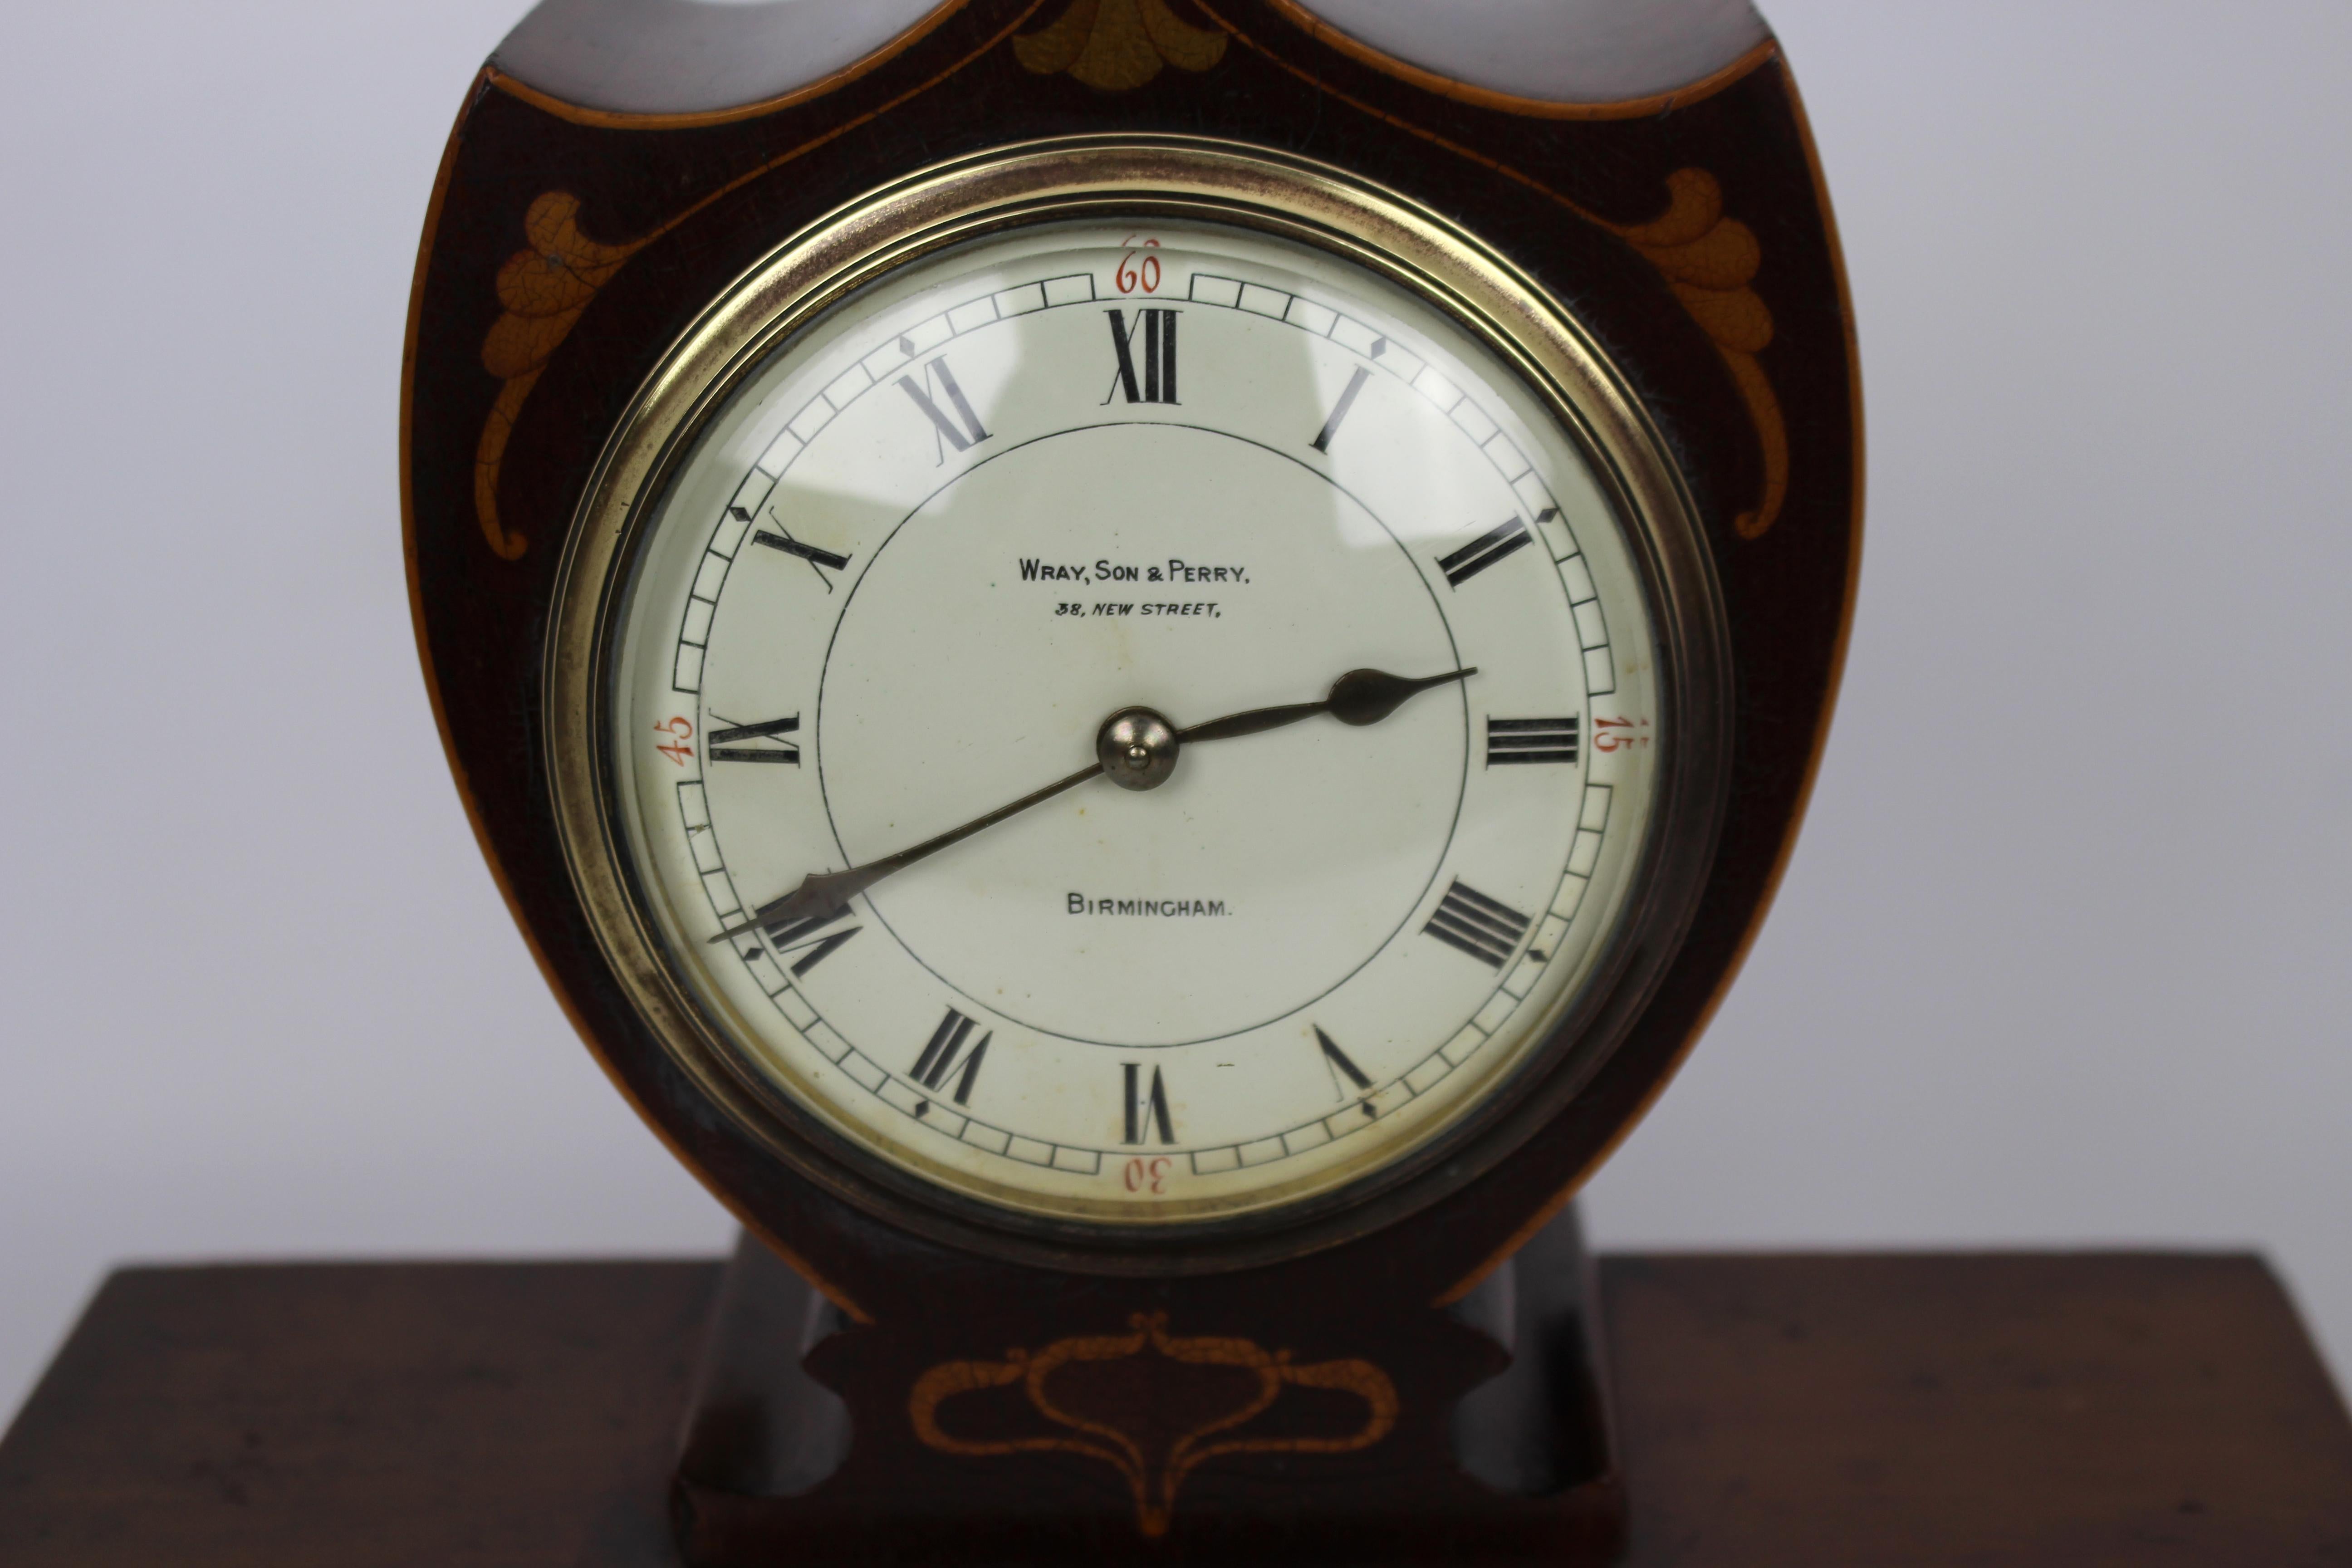 Elegant Inlaid Mahogany Mantle Clock by Wray, Son & Perry c.1900 For Sale 1